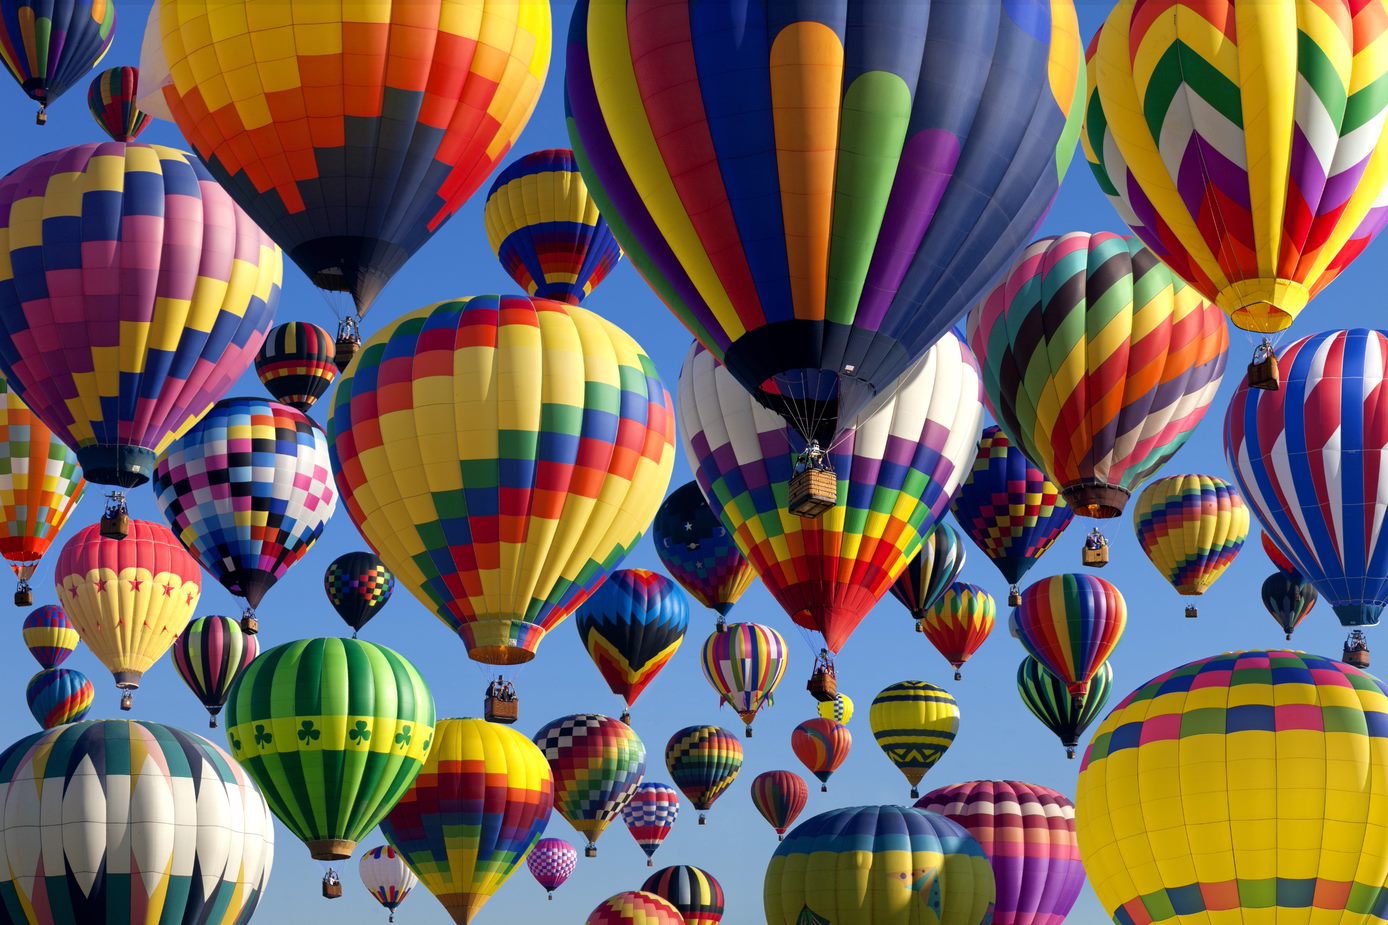 Hot air balloons in a clear blue sky